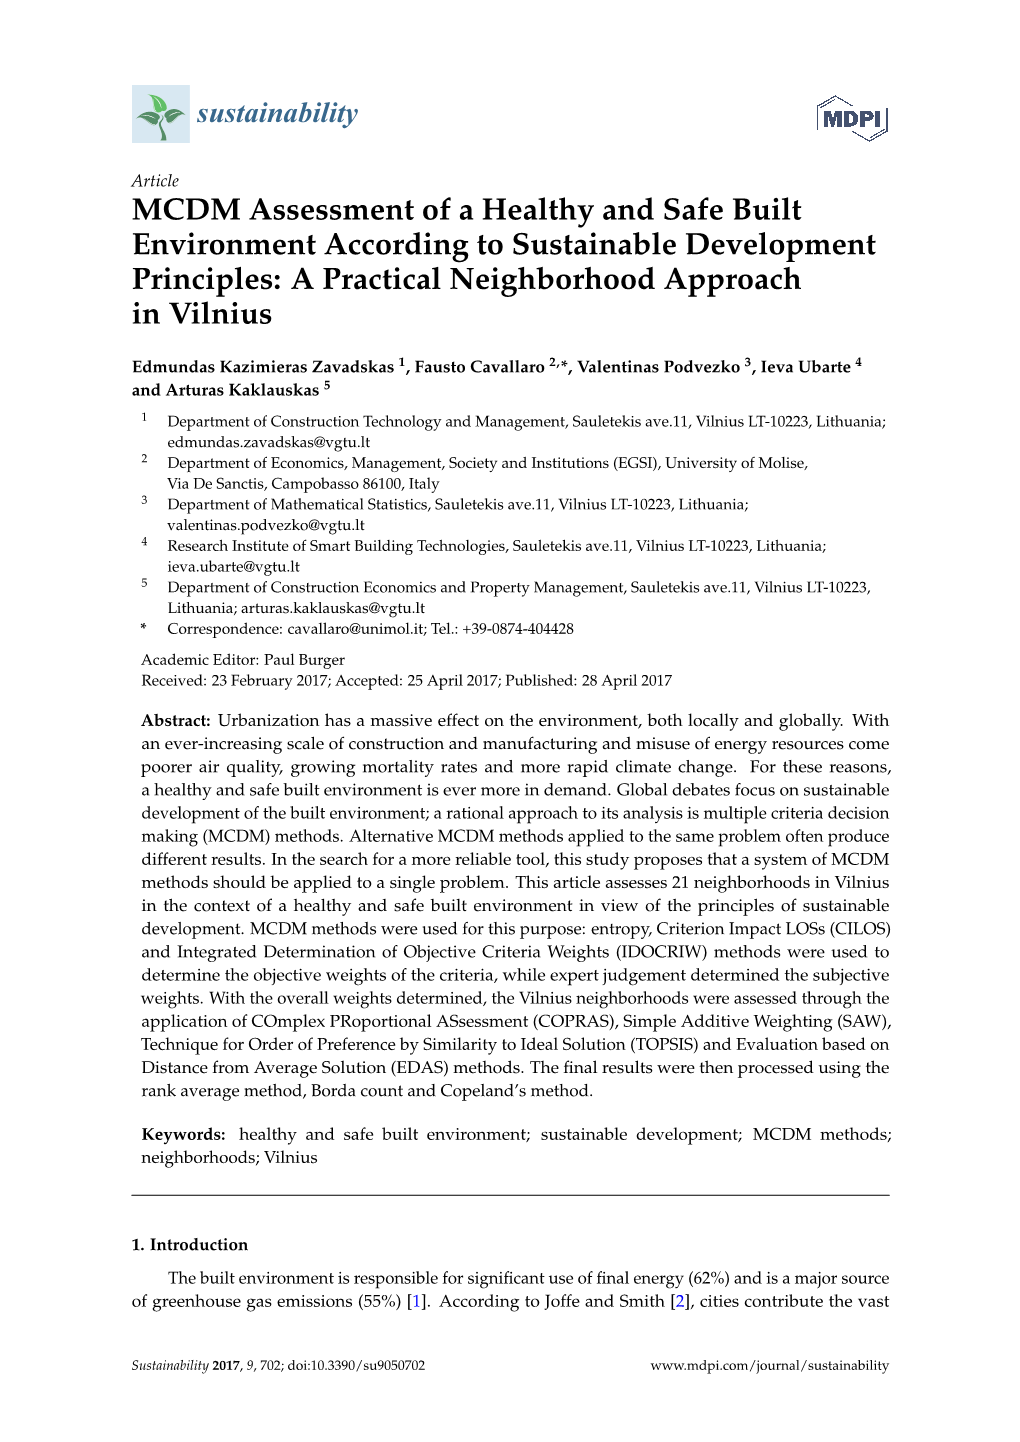 MCDM Assessment of a Healthy and Safe Built Environment According to Sustainable Development Principles: a Practical Neighborhood Approach in Vilnius